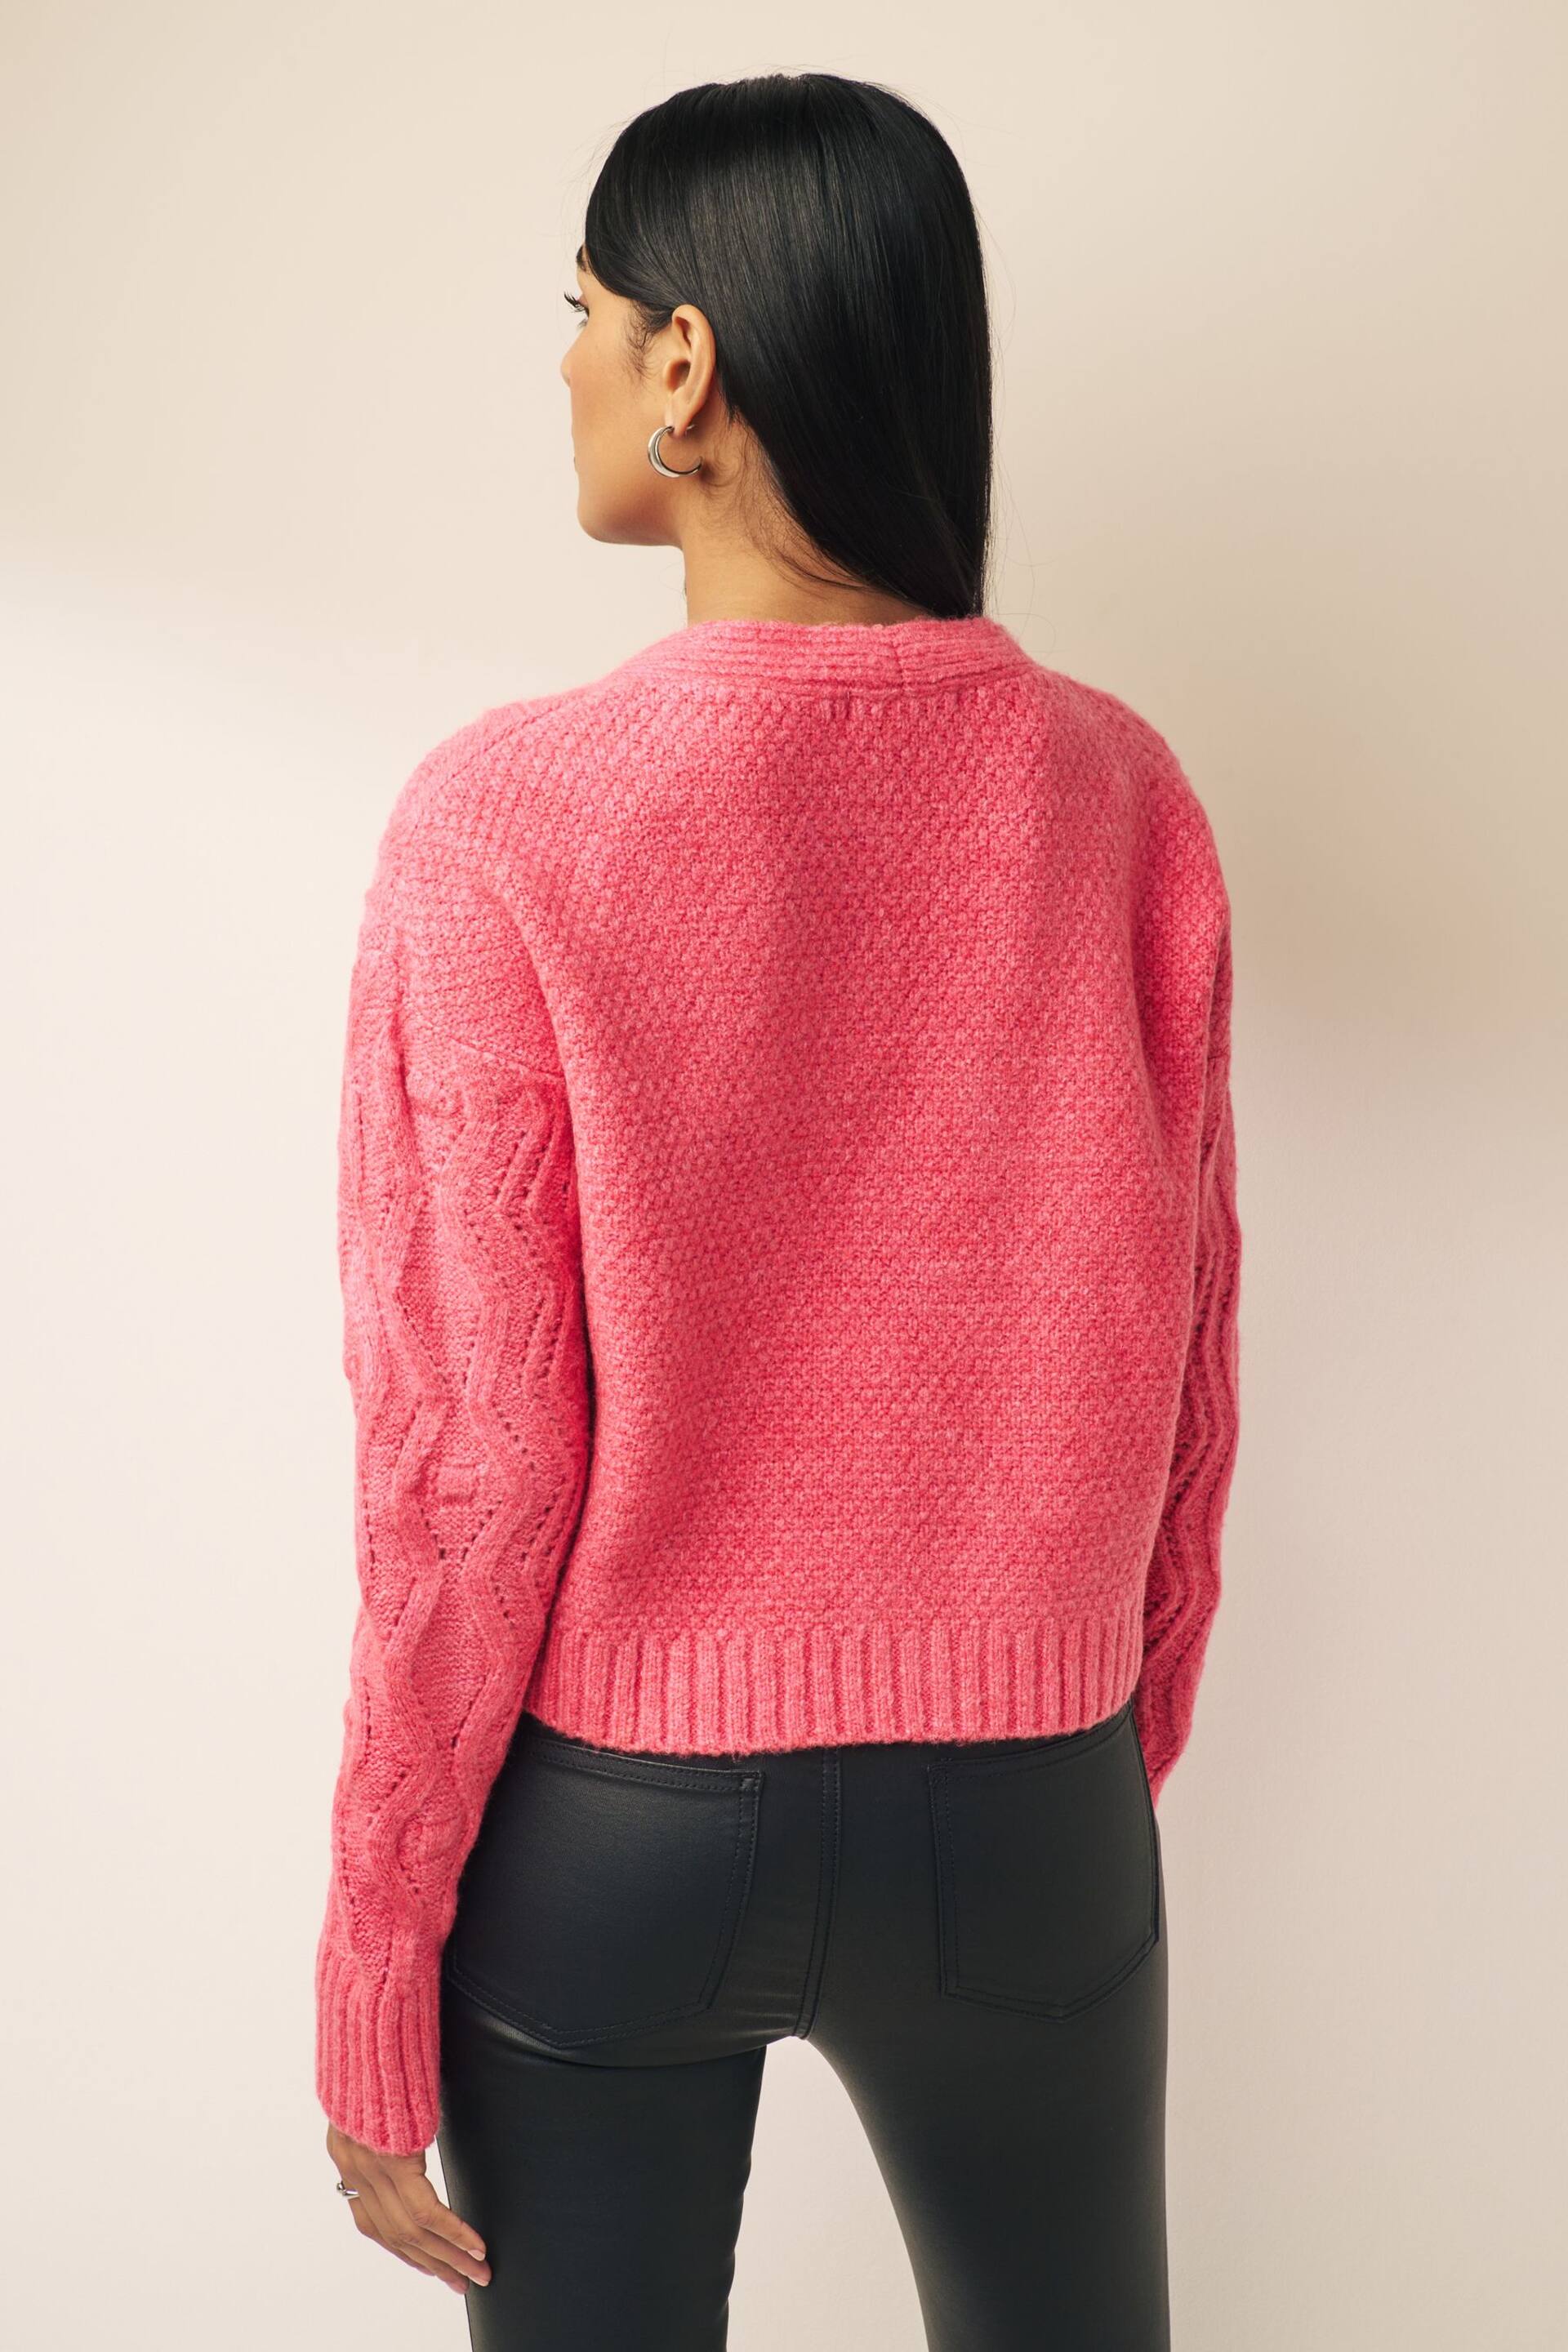 Coral Pink Gem Button Cardigan - Image 3 of 7